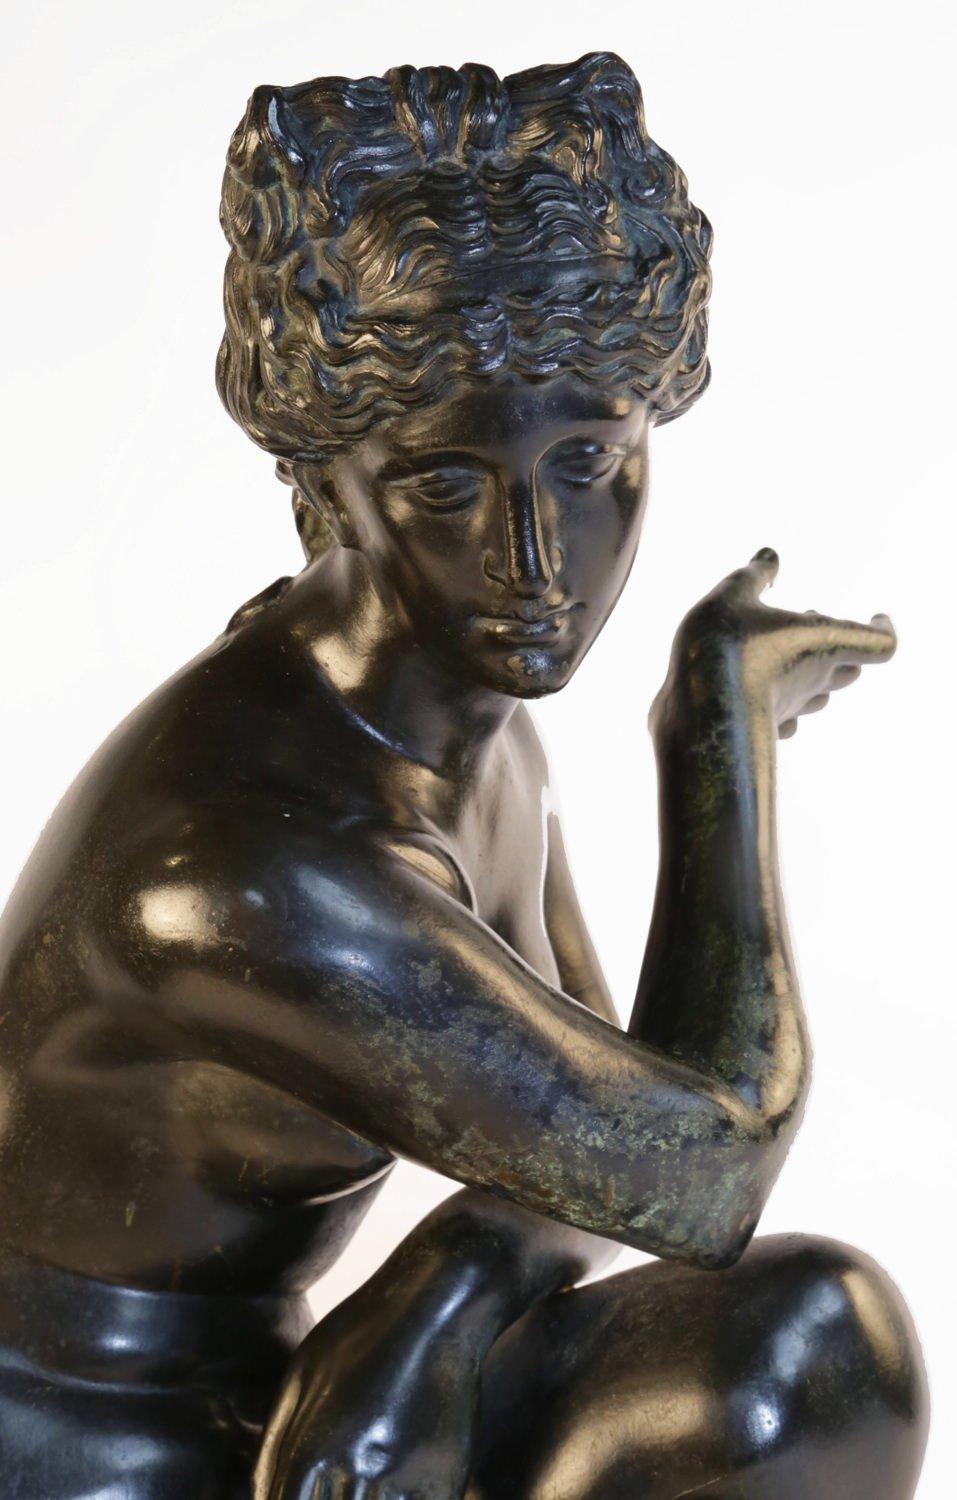 19th Century Bronze Figure of Crouching Venus or Naked Aphrodite
Bronze with dark patination
22.5 x 13 x 11 inches

The Crouching Venus is a Hellenistic model of Venus surprised at her bath. Venus crouches with her right knee close to the ground,